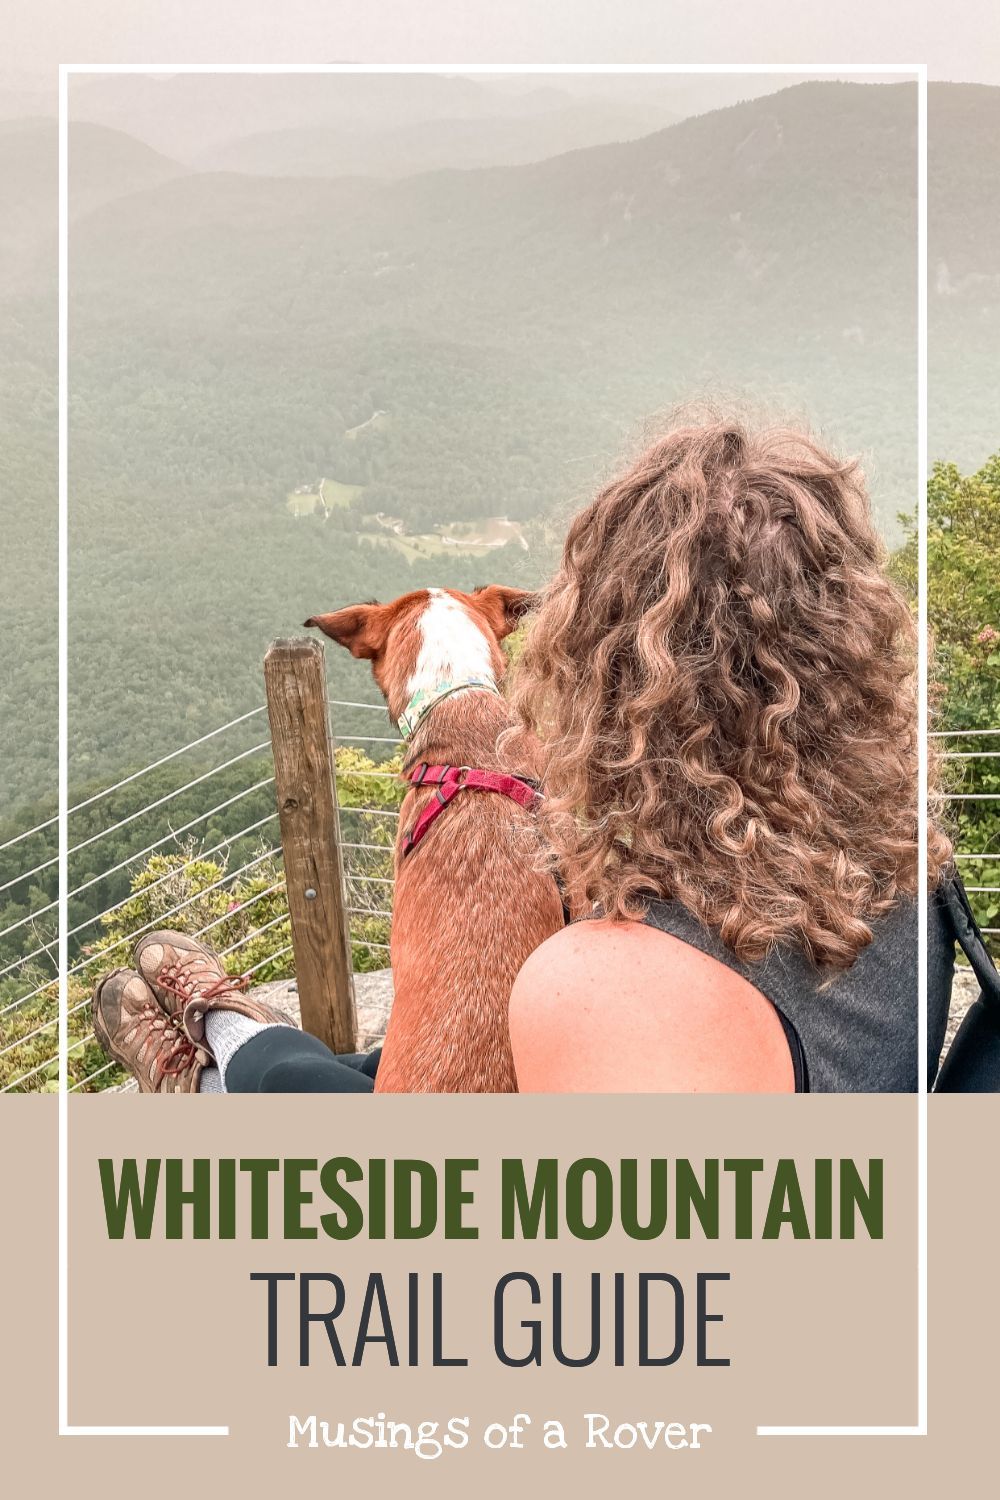 Whiteside Mountain located outside of Highlands NC is a moderately easy hike you should add to your trip! This hike will give you amazing views of the countryside. And since it’s less than 2 hours away fro Greenville, SC, it makes a wonderful day trip.